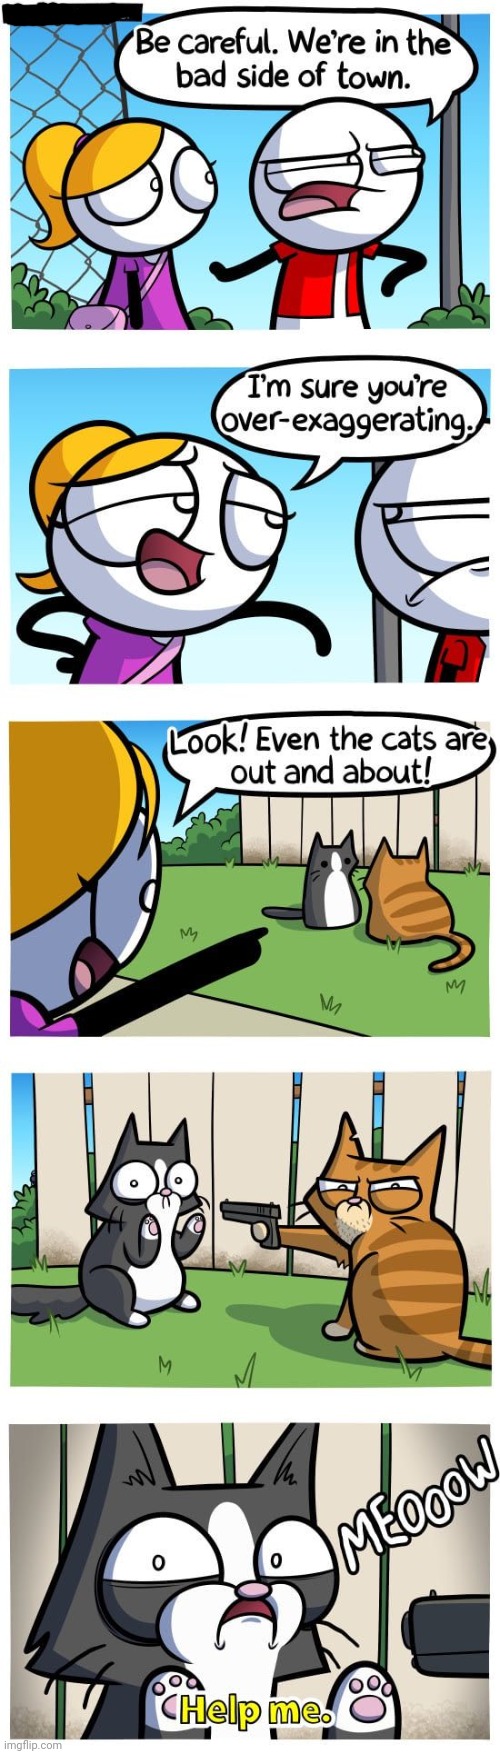 The bad side of town | image tagged in cats,cat,town,gun,comics/cartoons,comics | made w/ Imgflip meme maker